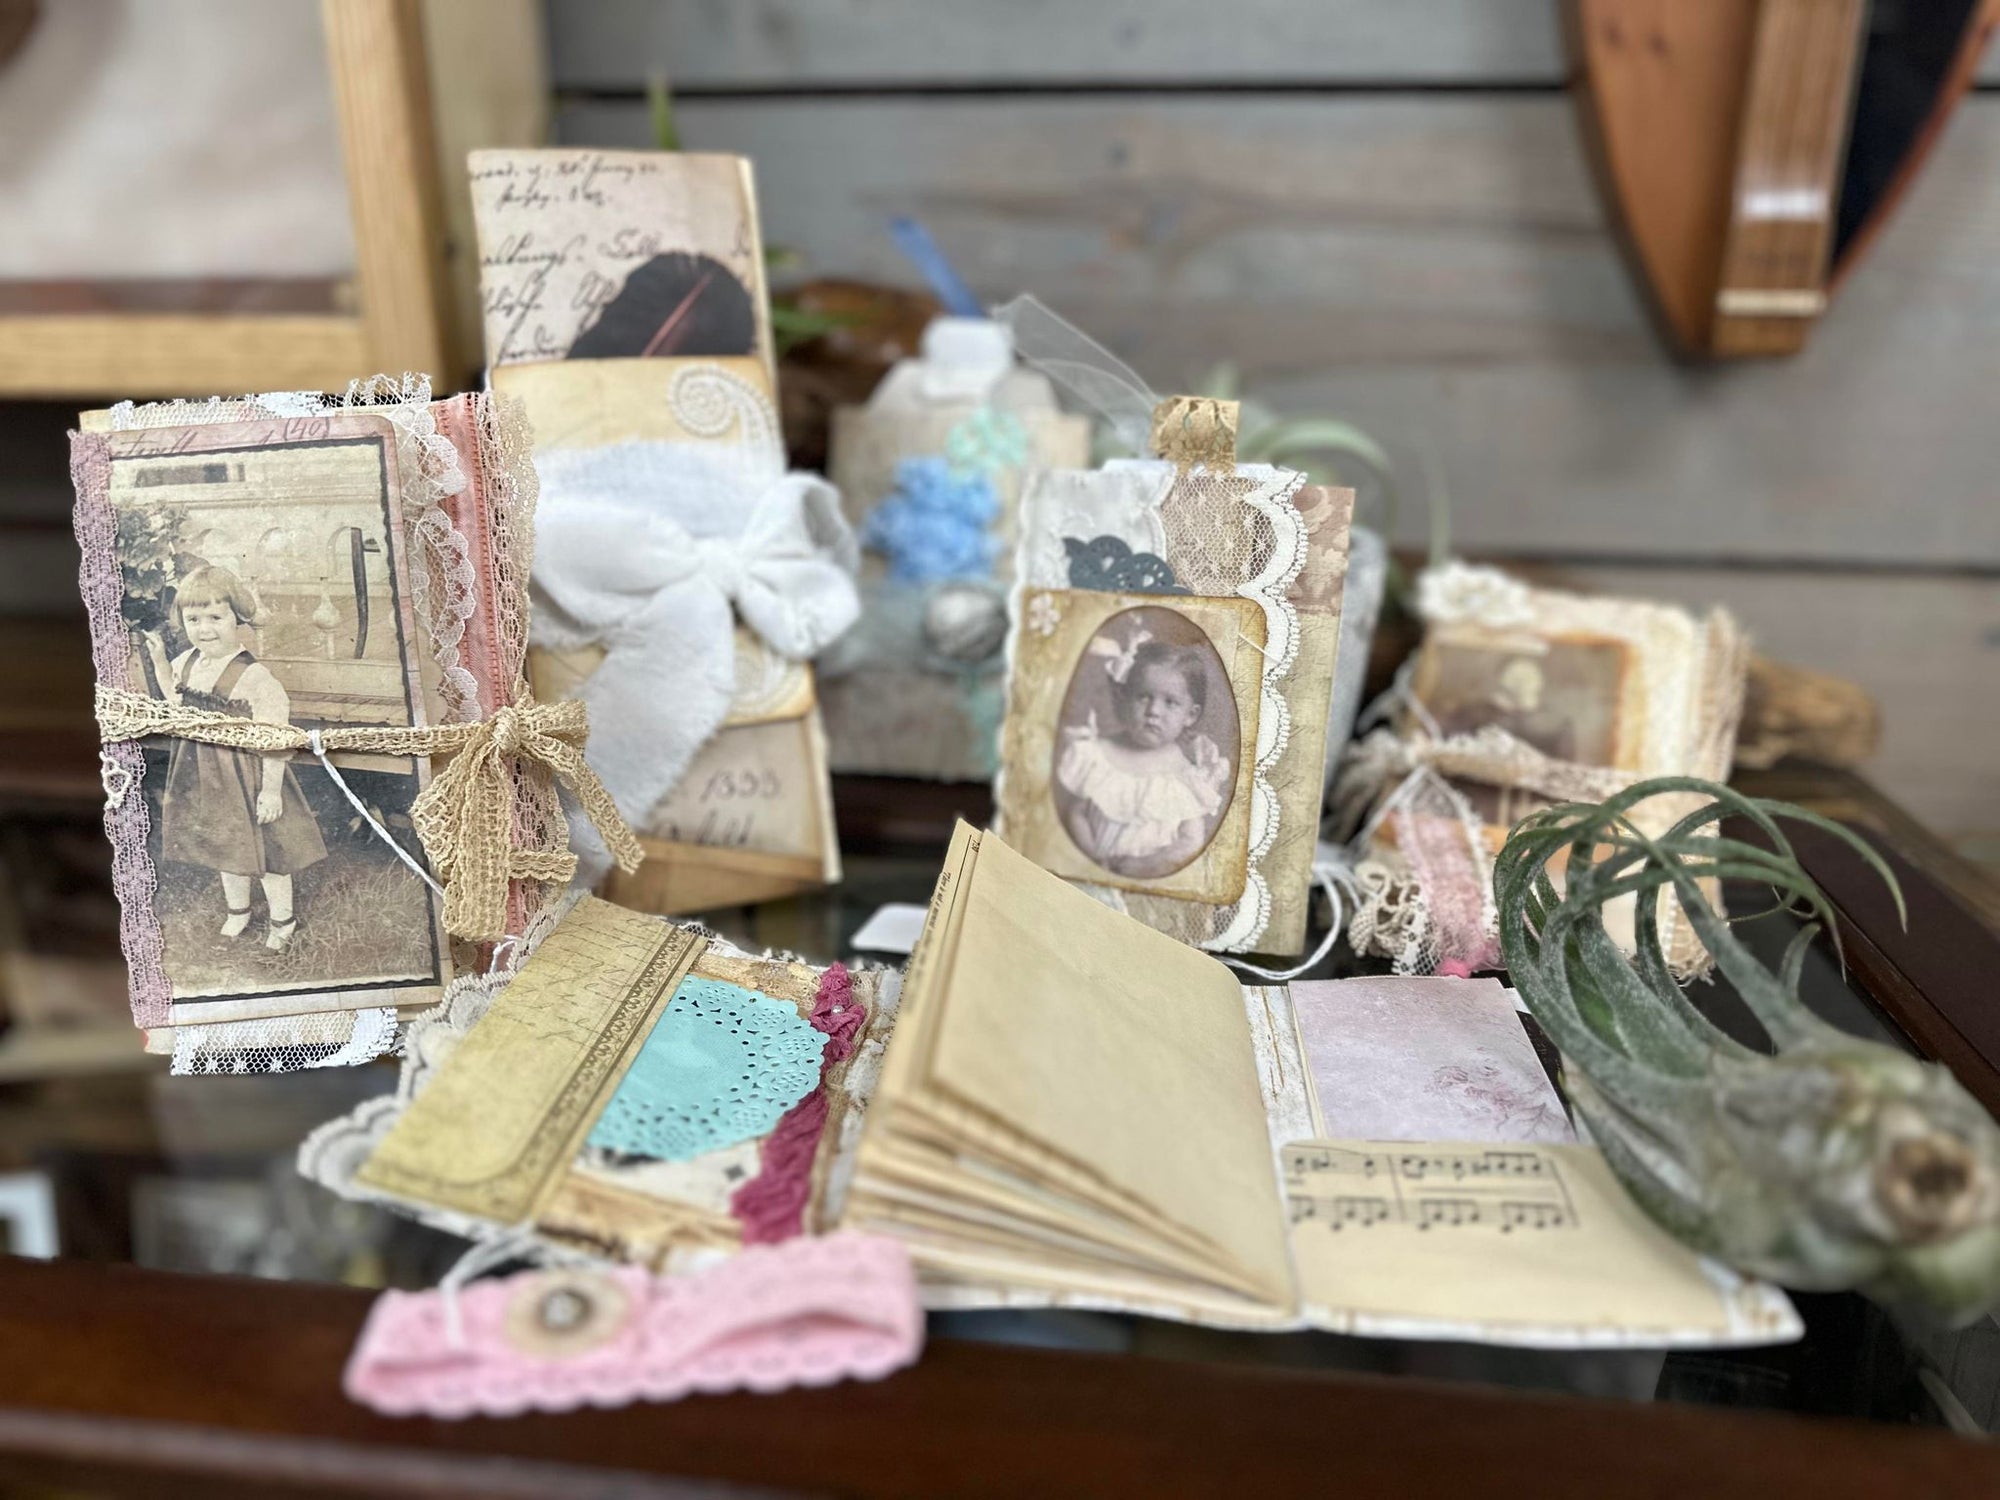 A collection of Mrs. Pat's Junk Journals and photos on a table by a local artist.